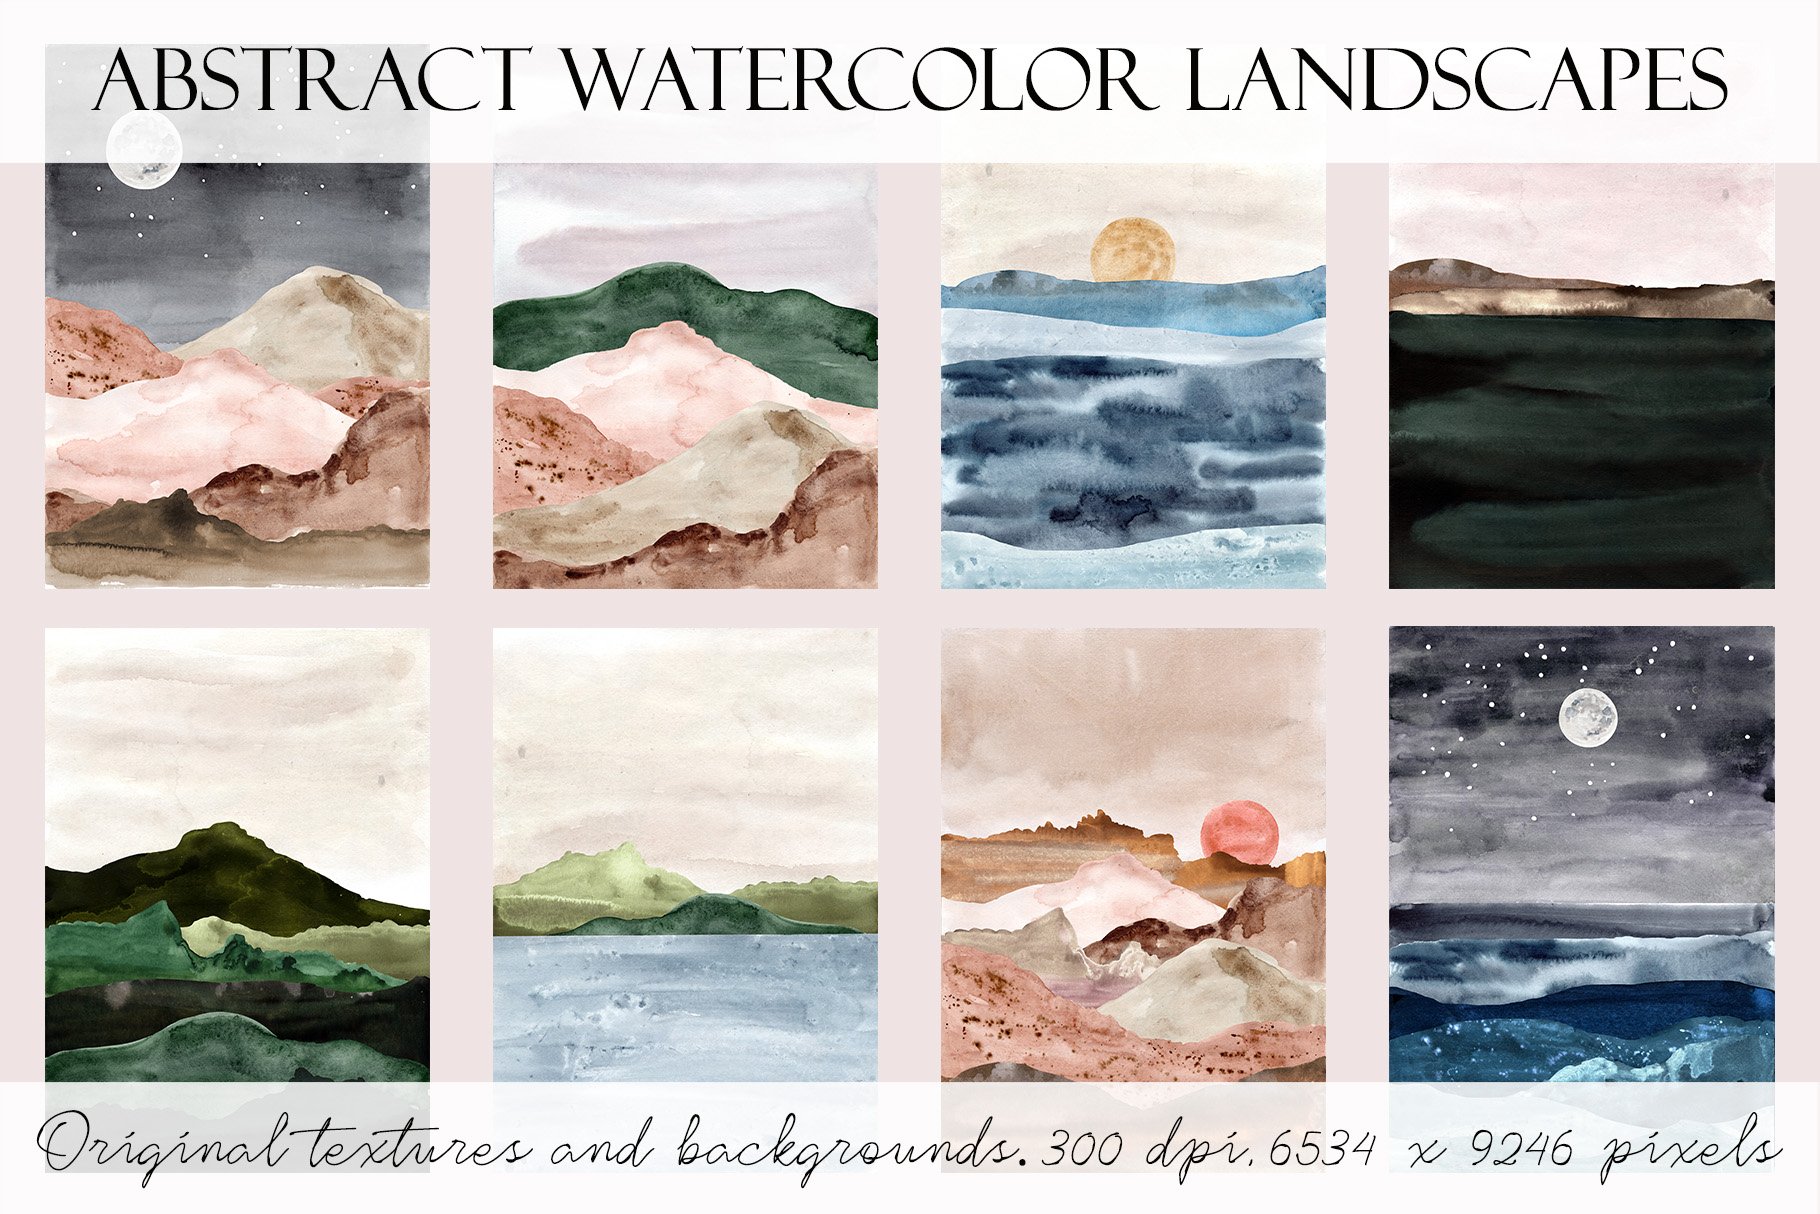 Abstract Watercolor Landscape Prints cover image.